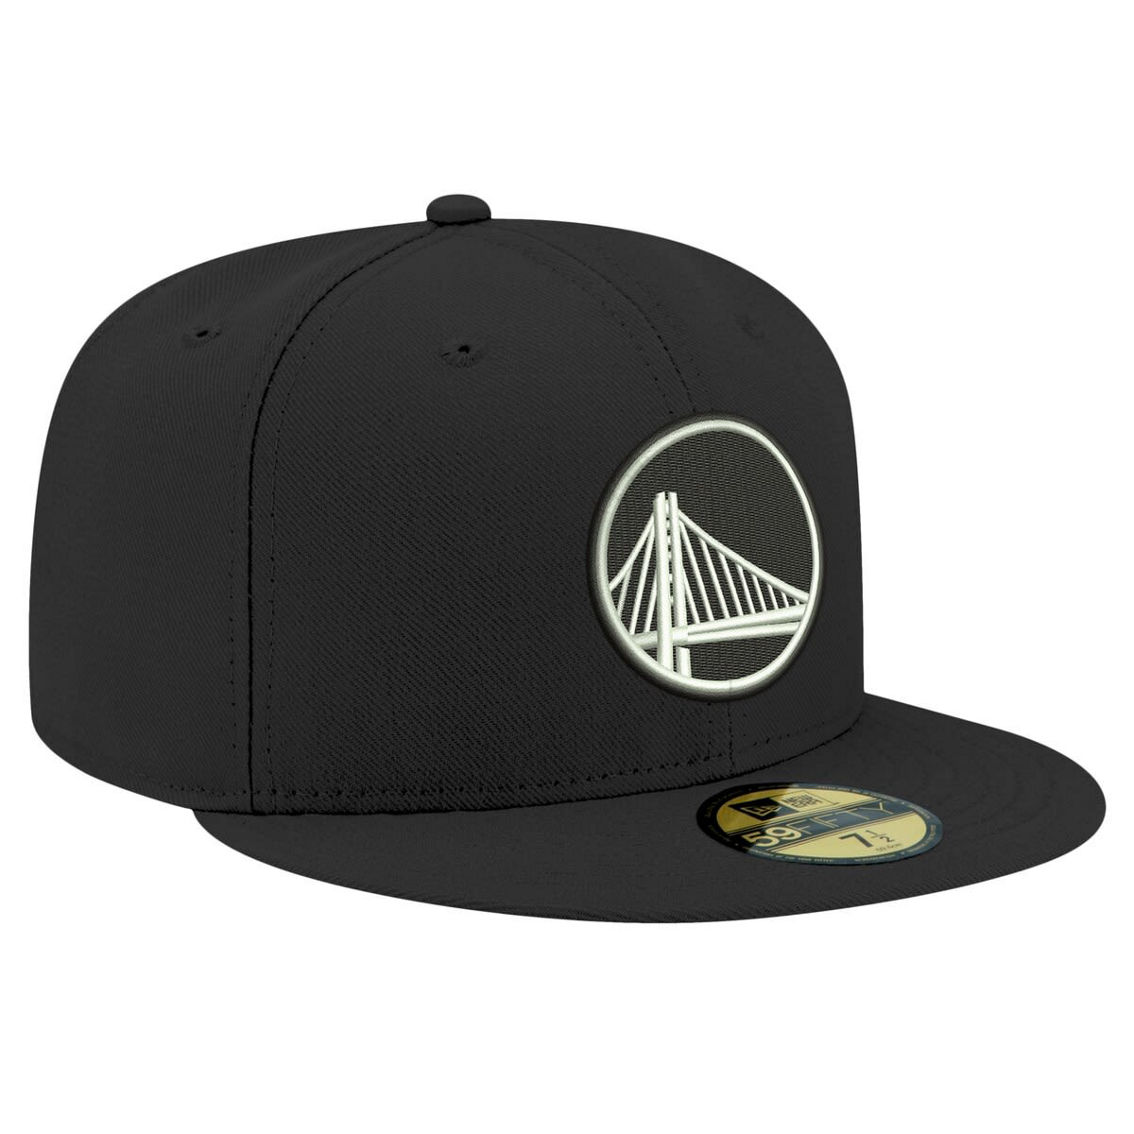 New Era Men's Black Golden State Warriors Black & White 59FIFTY Fitted Hat - Image 4 of 4